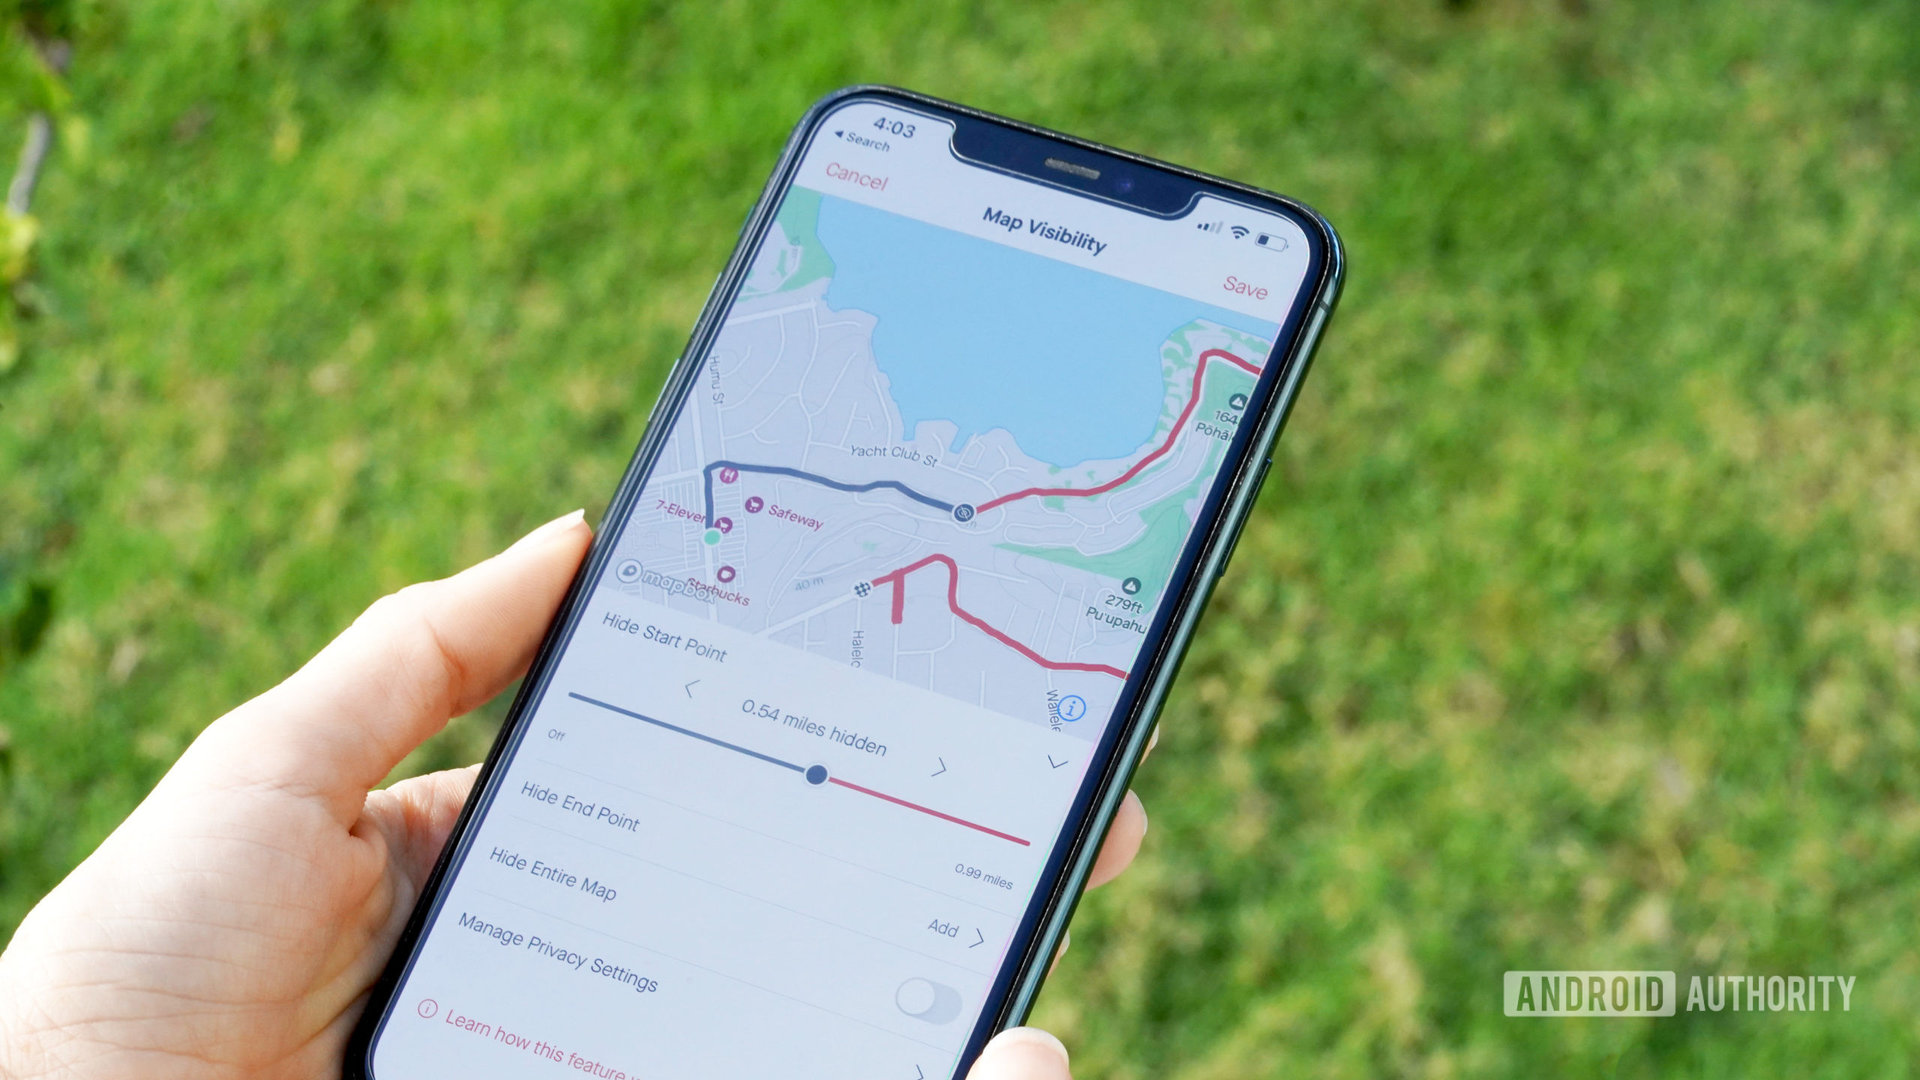 An iPhone user reviews their Map Visibility preferences in the Strava app.